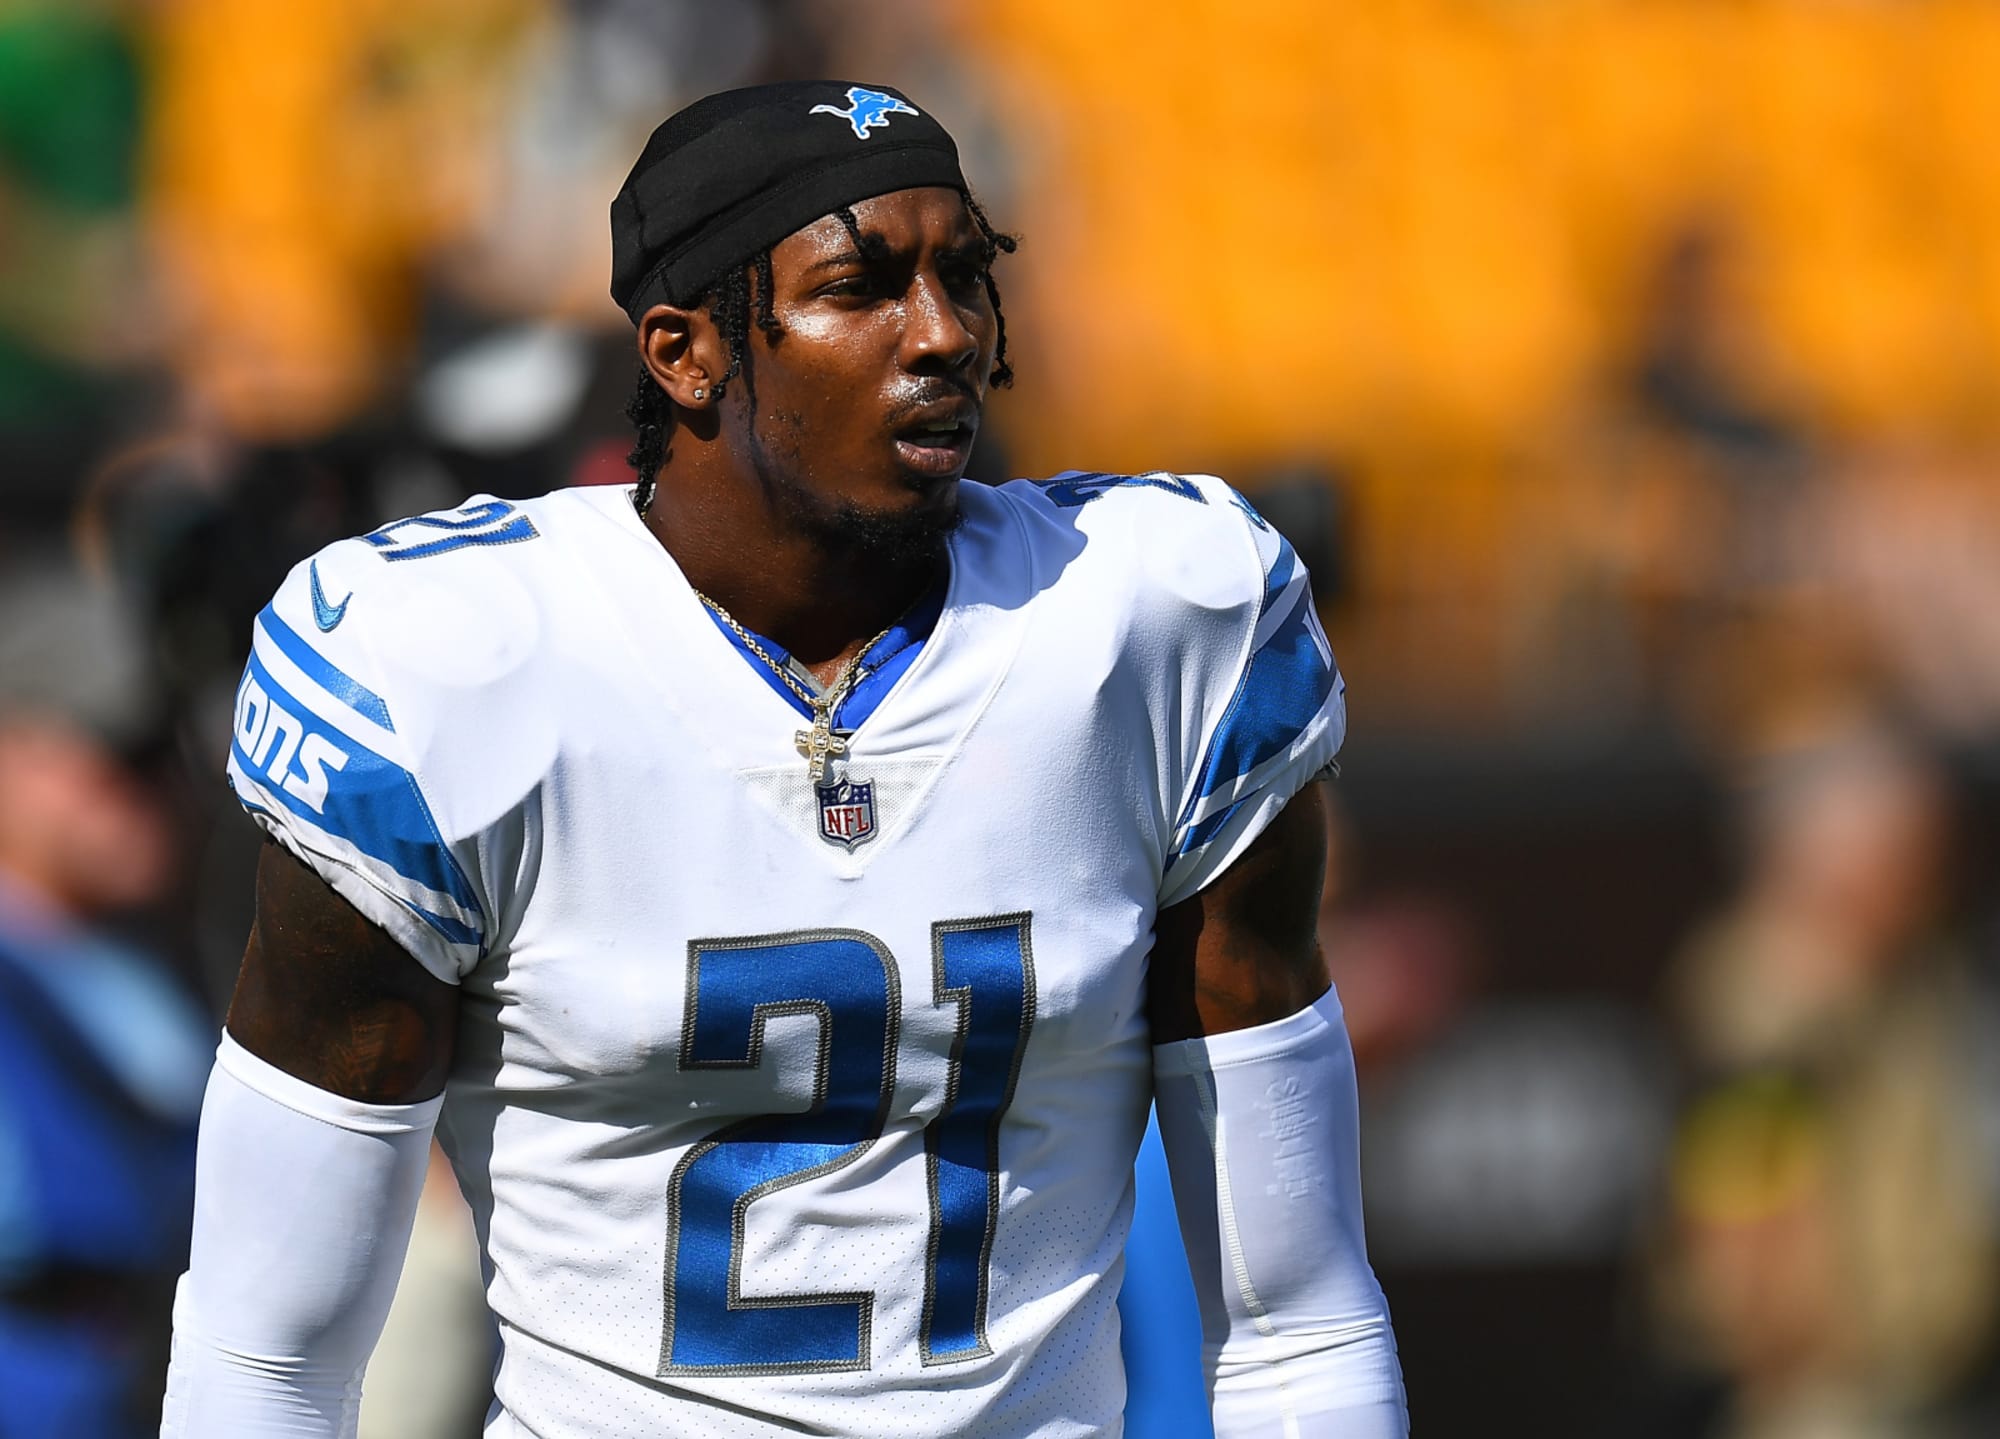 Lions safety Tracy Walker showcases progress from torn Achilles in video